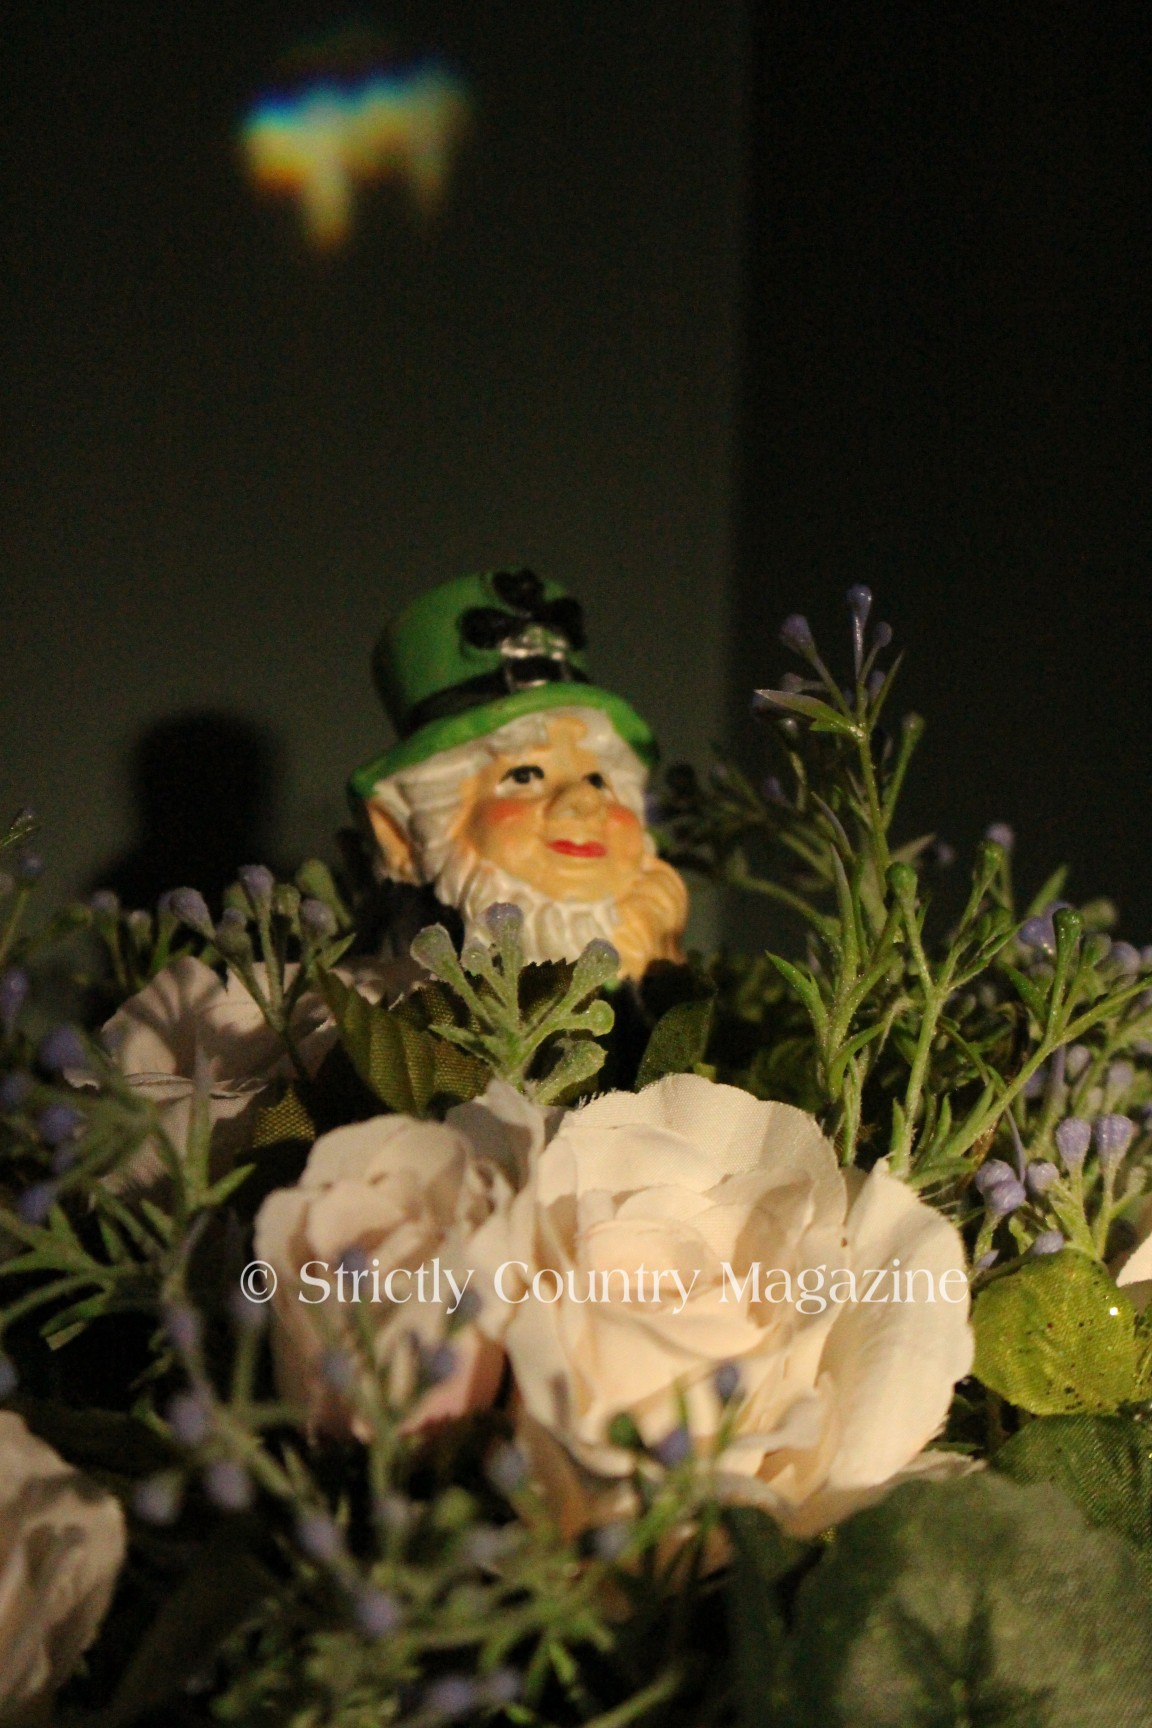 Strictly Country copyright A Northwoods Country Saint Patrick's Day Leprechaun